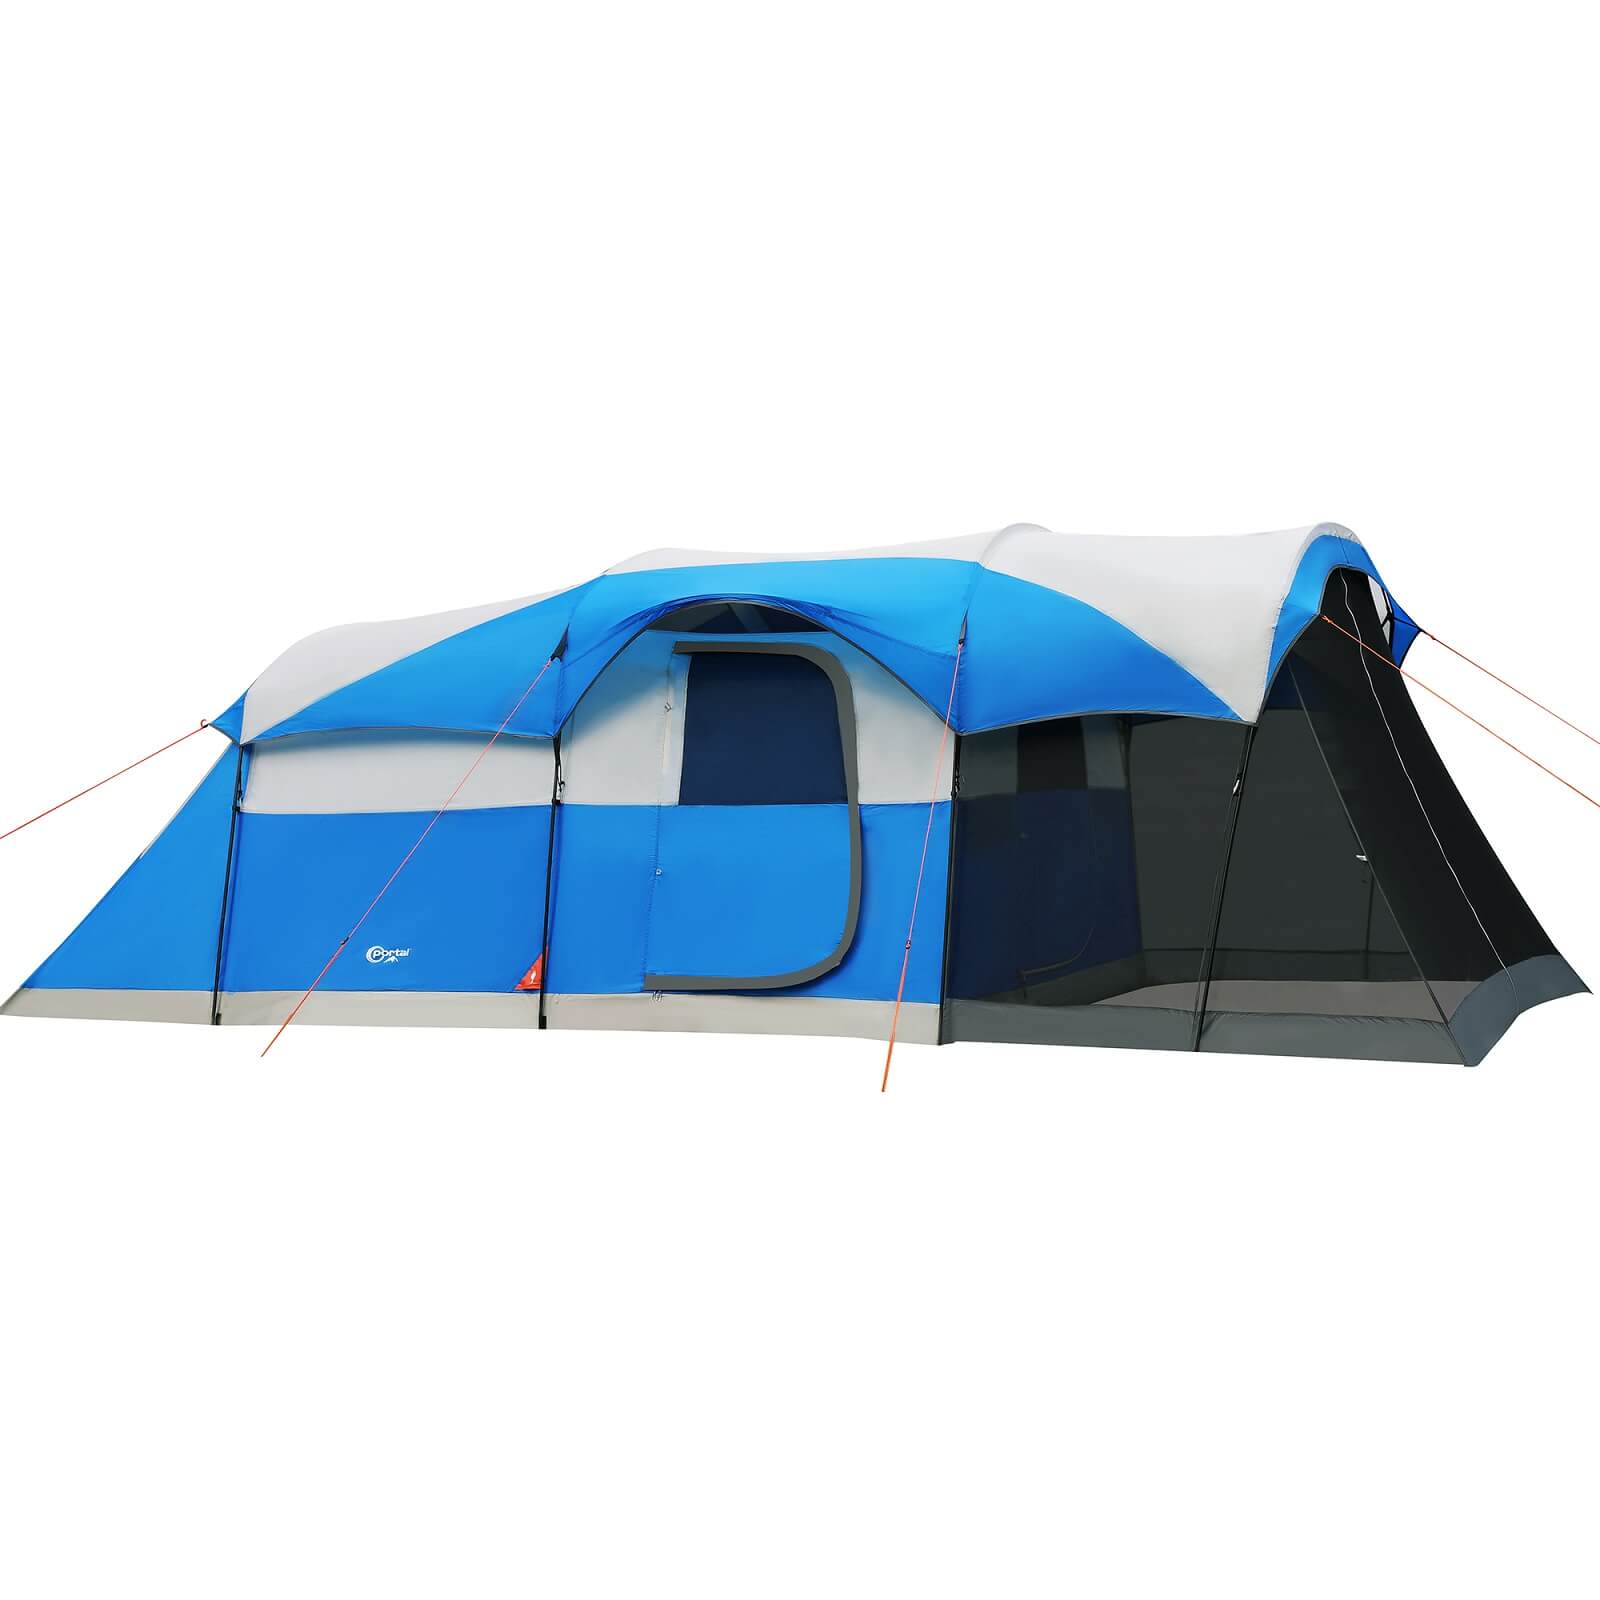 8 Person Inflatable Camping Tents for sale